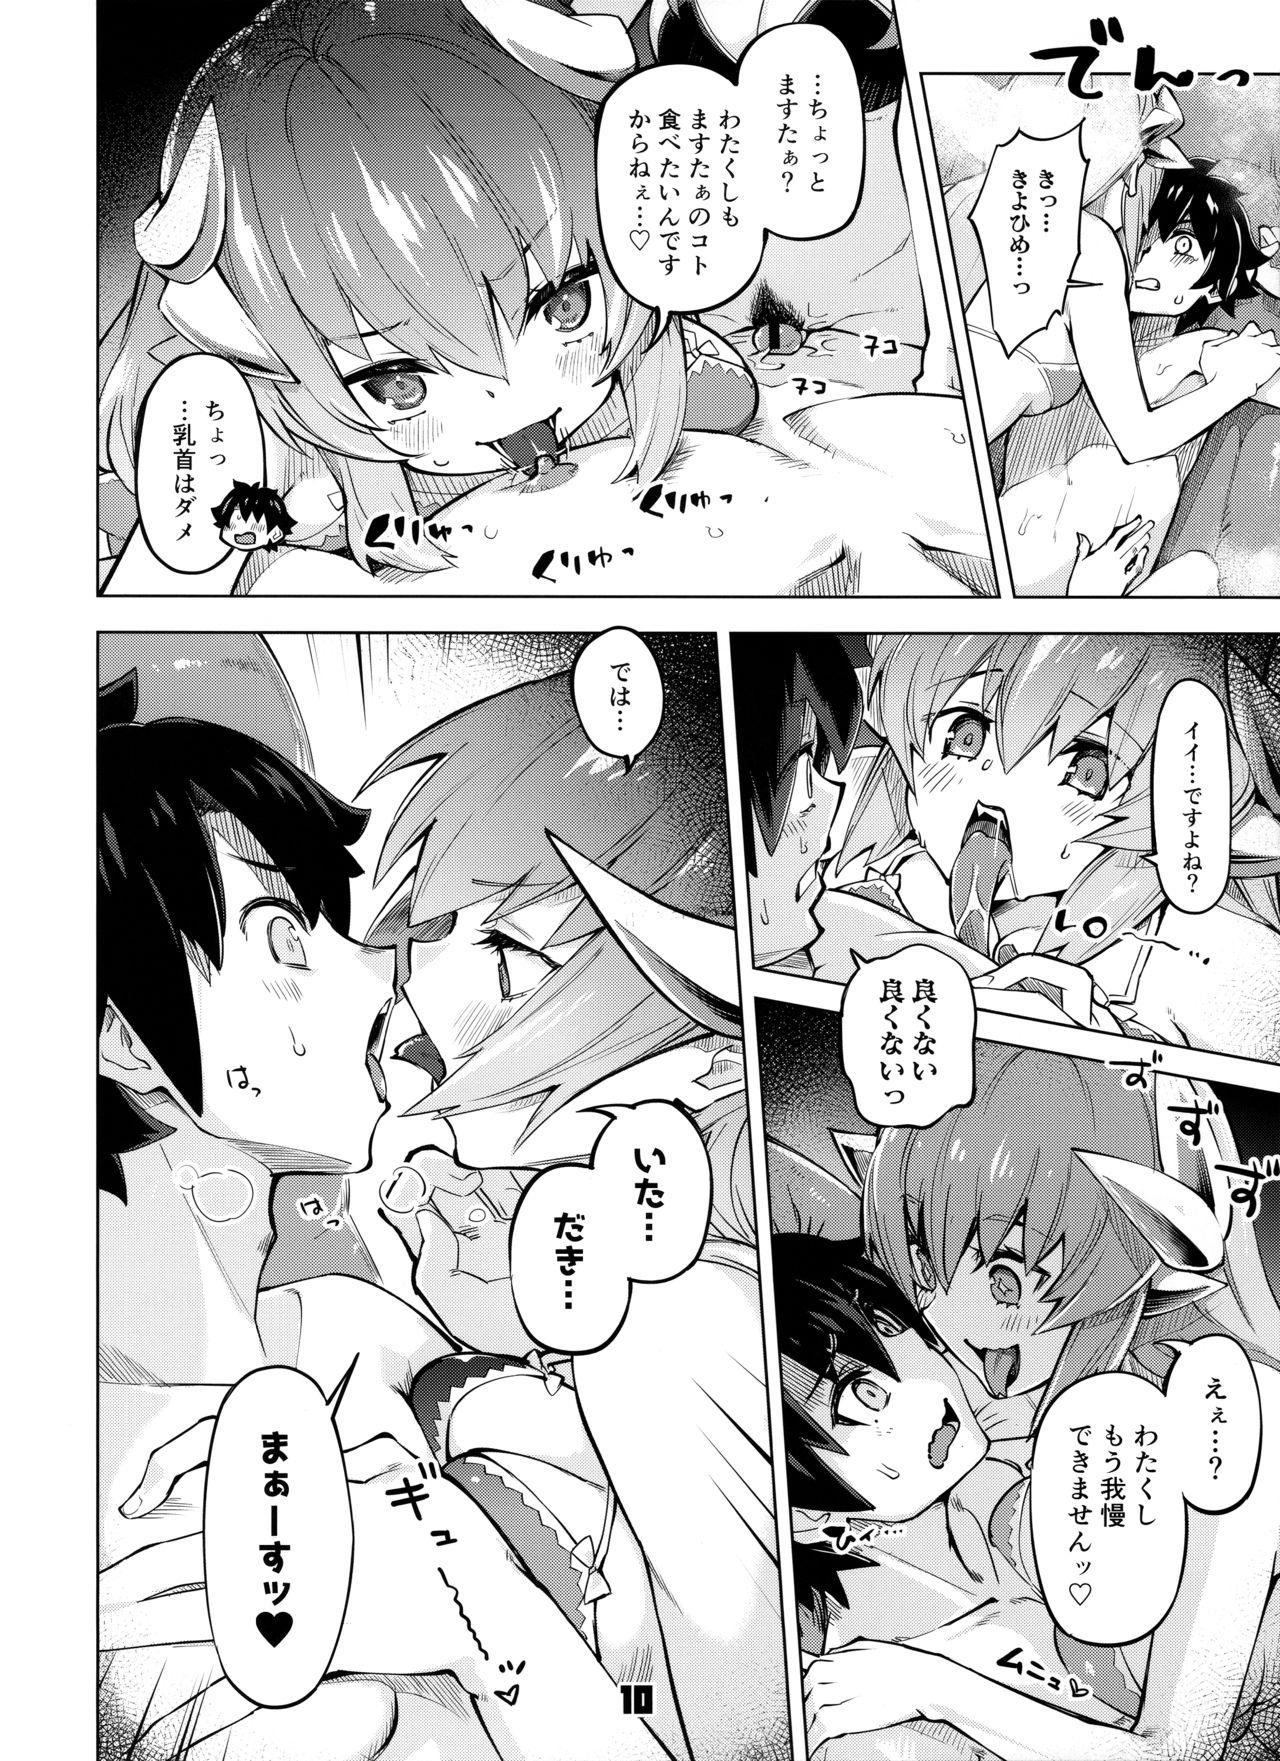 Gagging Sex Shinai to Derarenai My Room 2 - My room can not go out - Fate grand order Naturaltits - Page 9